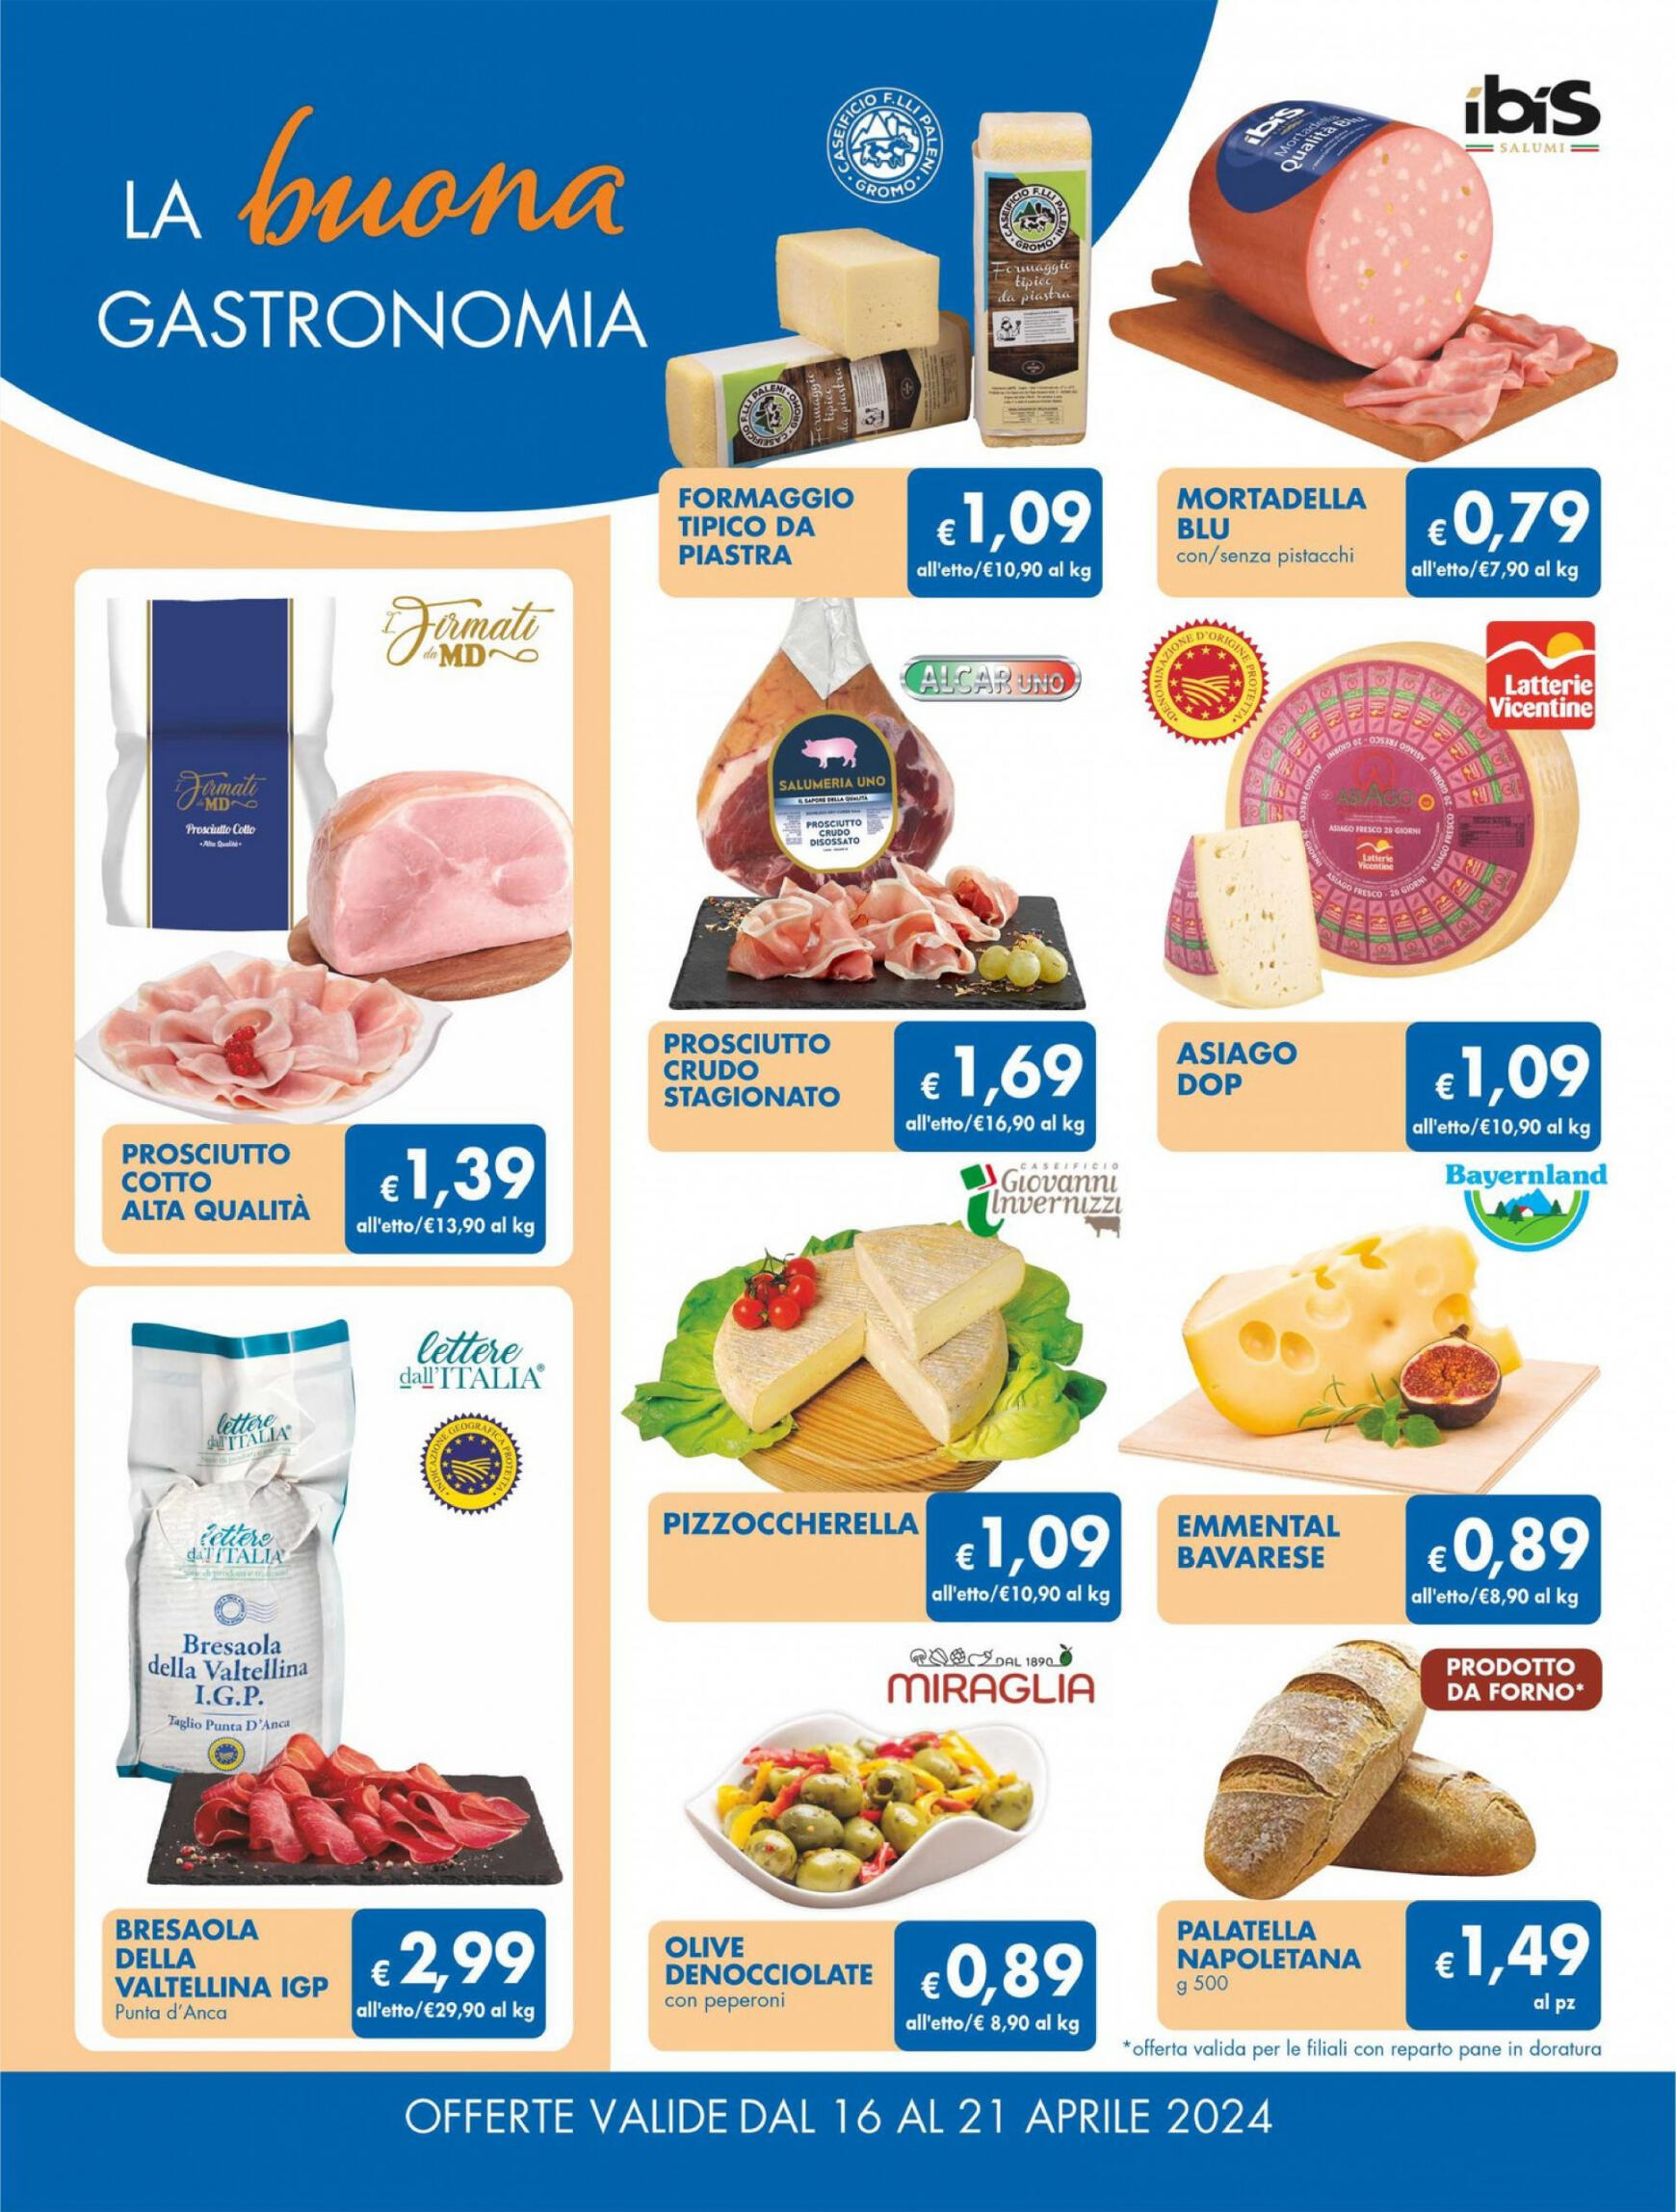 md-discount - Nuovo volantino MD 16.04. - 21.04. - page: 10